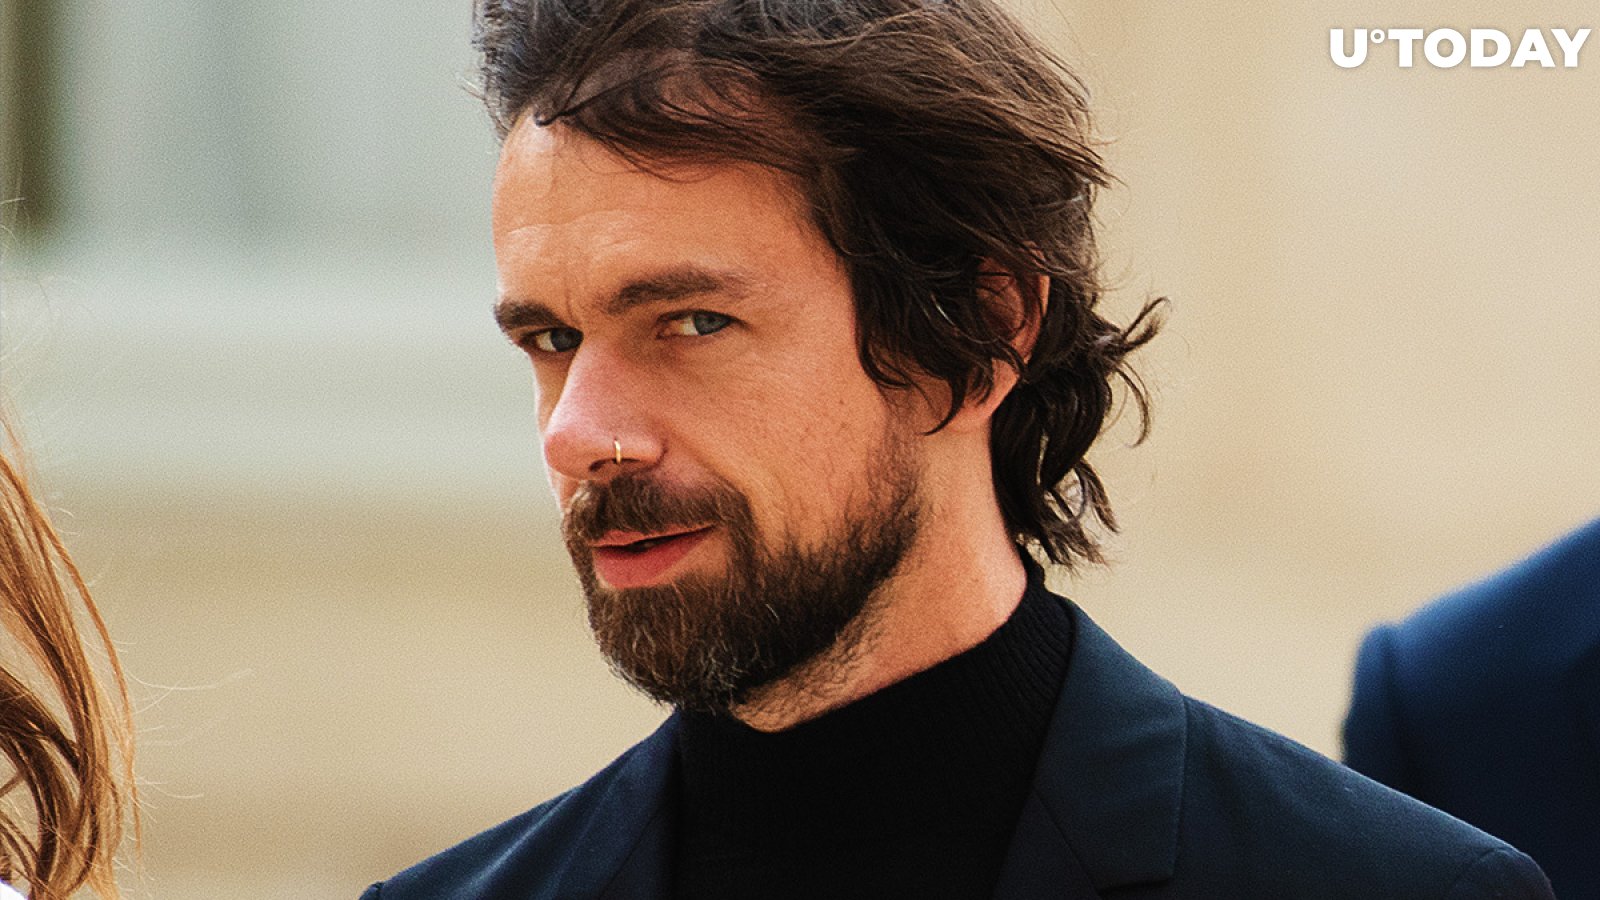 Bitcoin (BTC) Proponent Jack Dorsey to Remain Twitter CEO